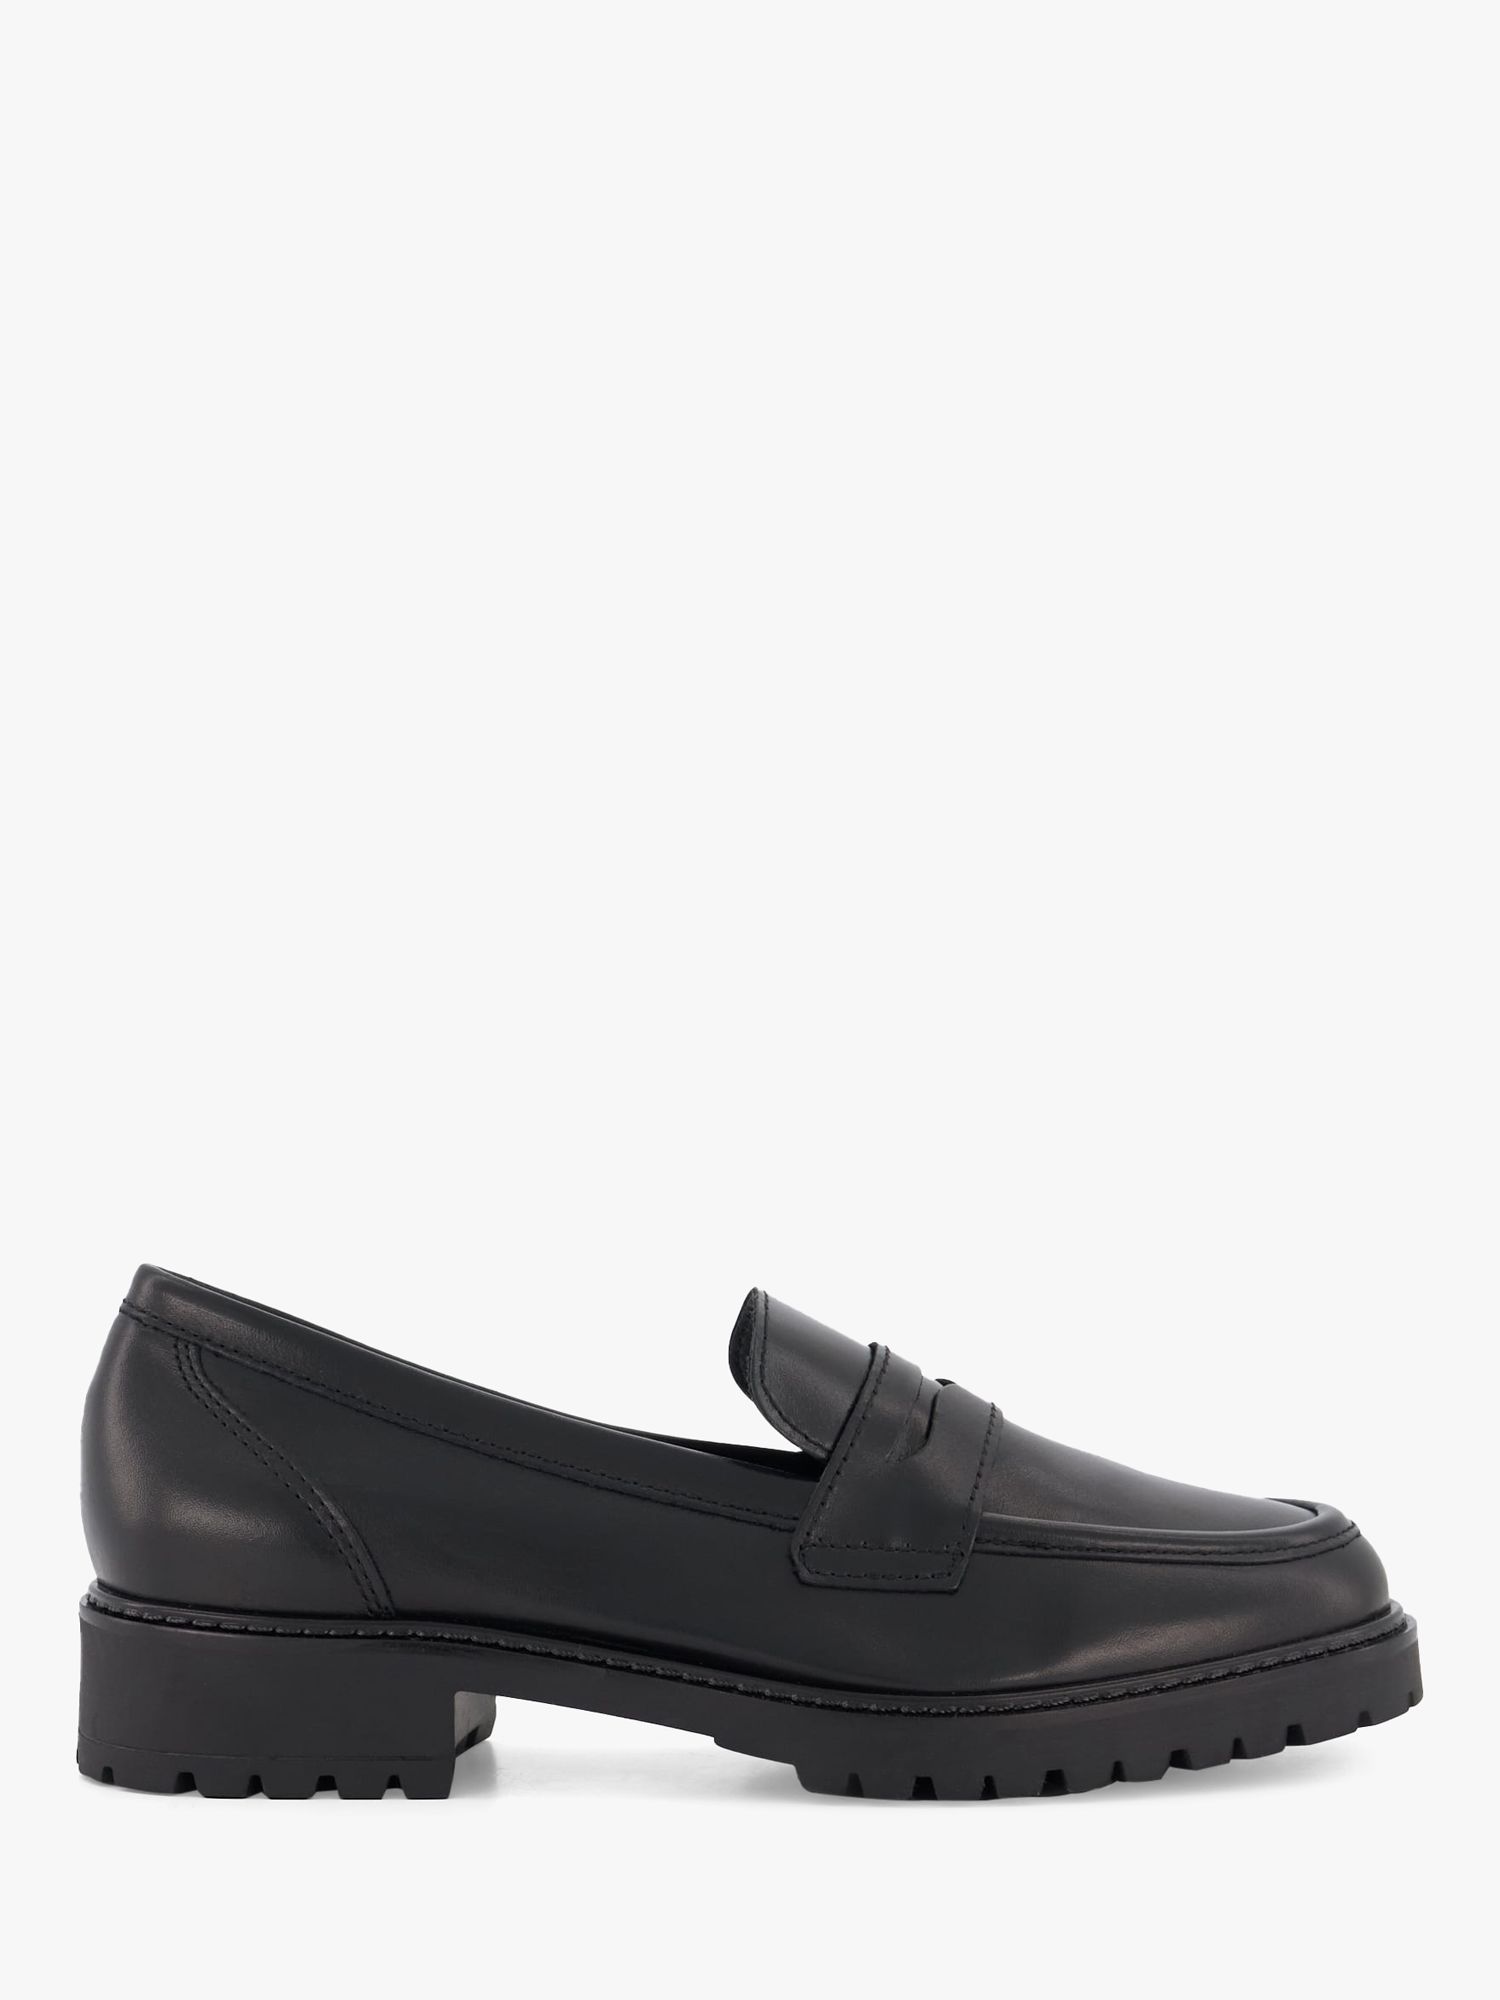 Dune Gild Leather Cleated Penny Loafer, Black at John Lewis & Partners